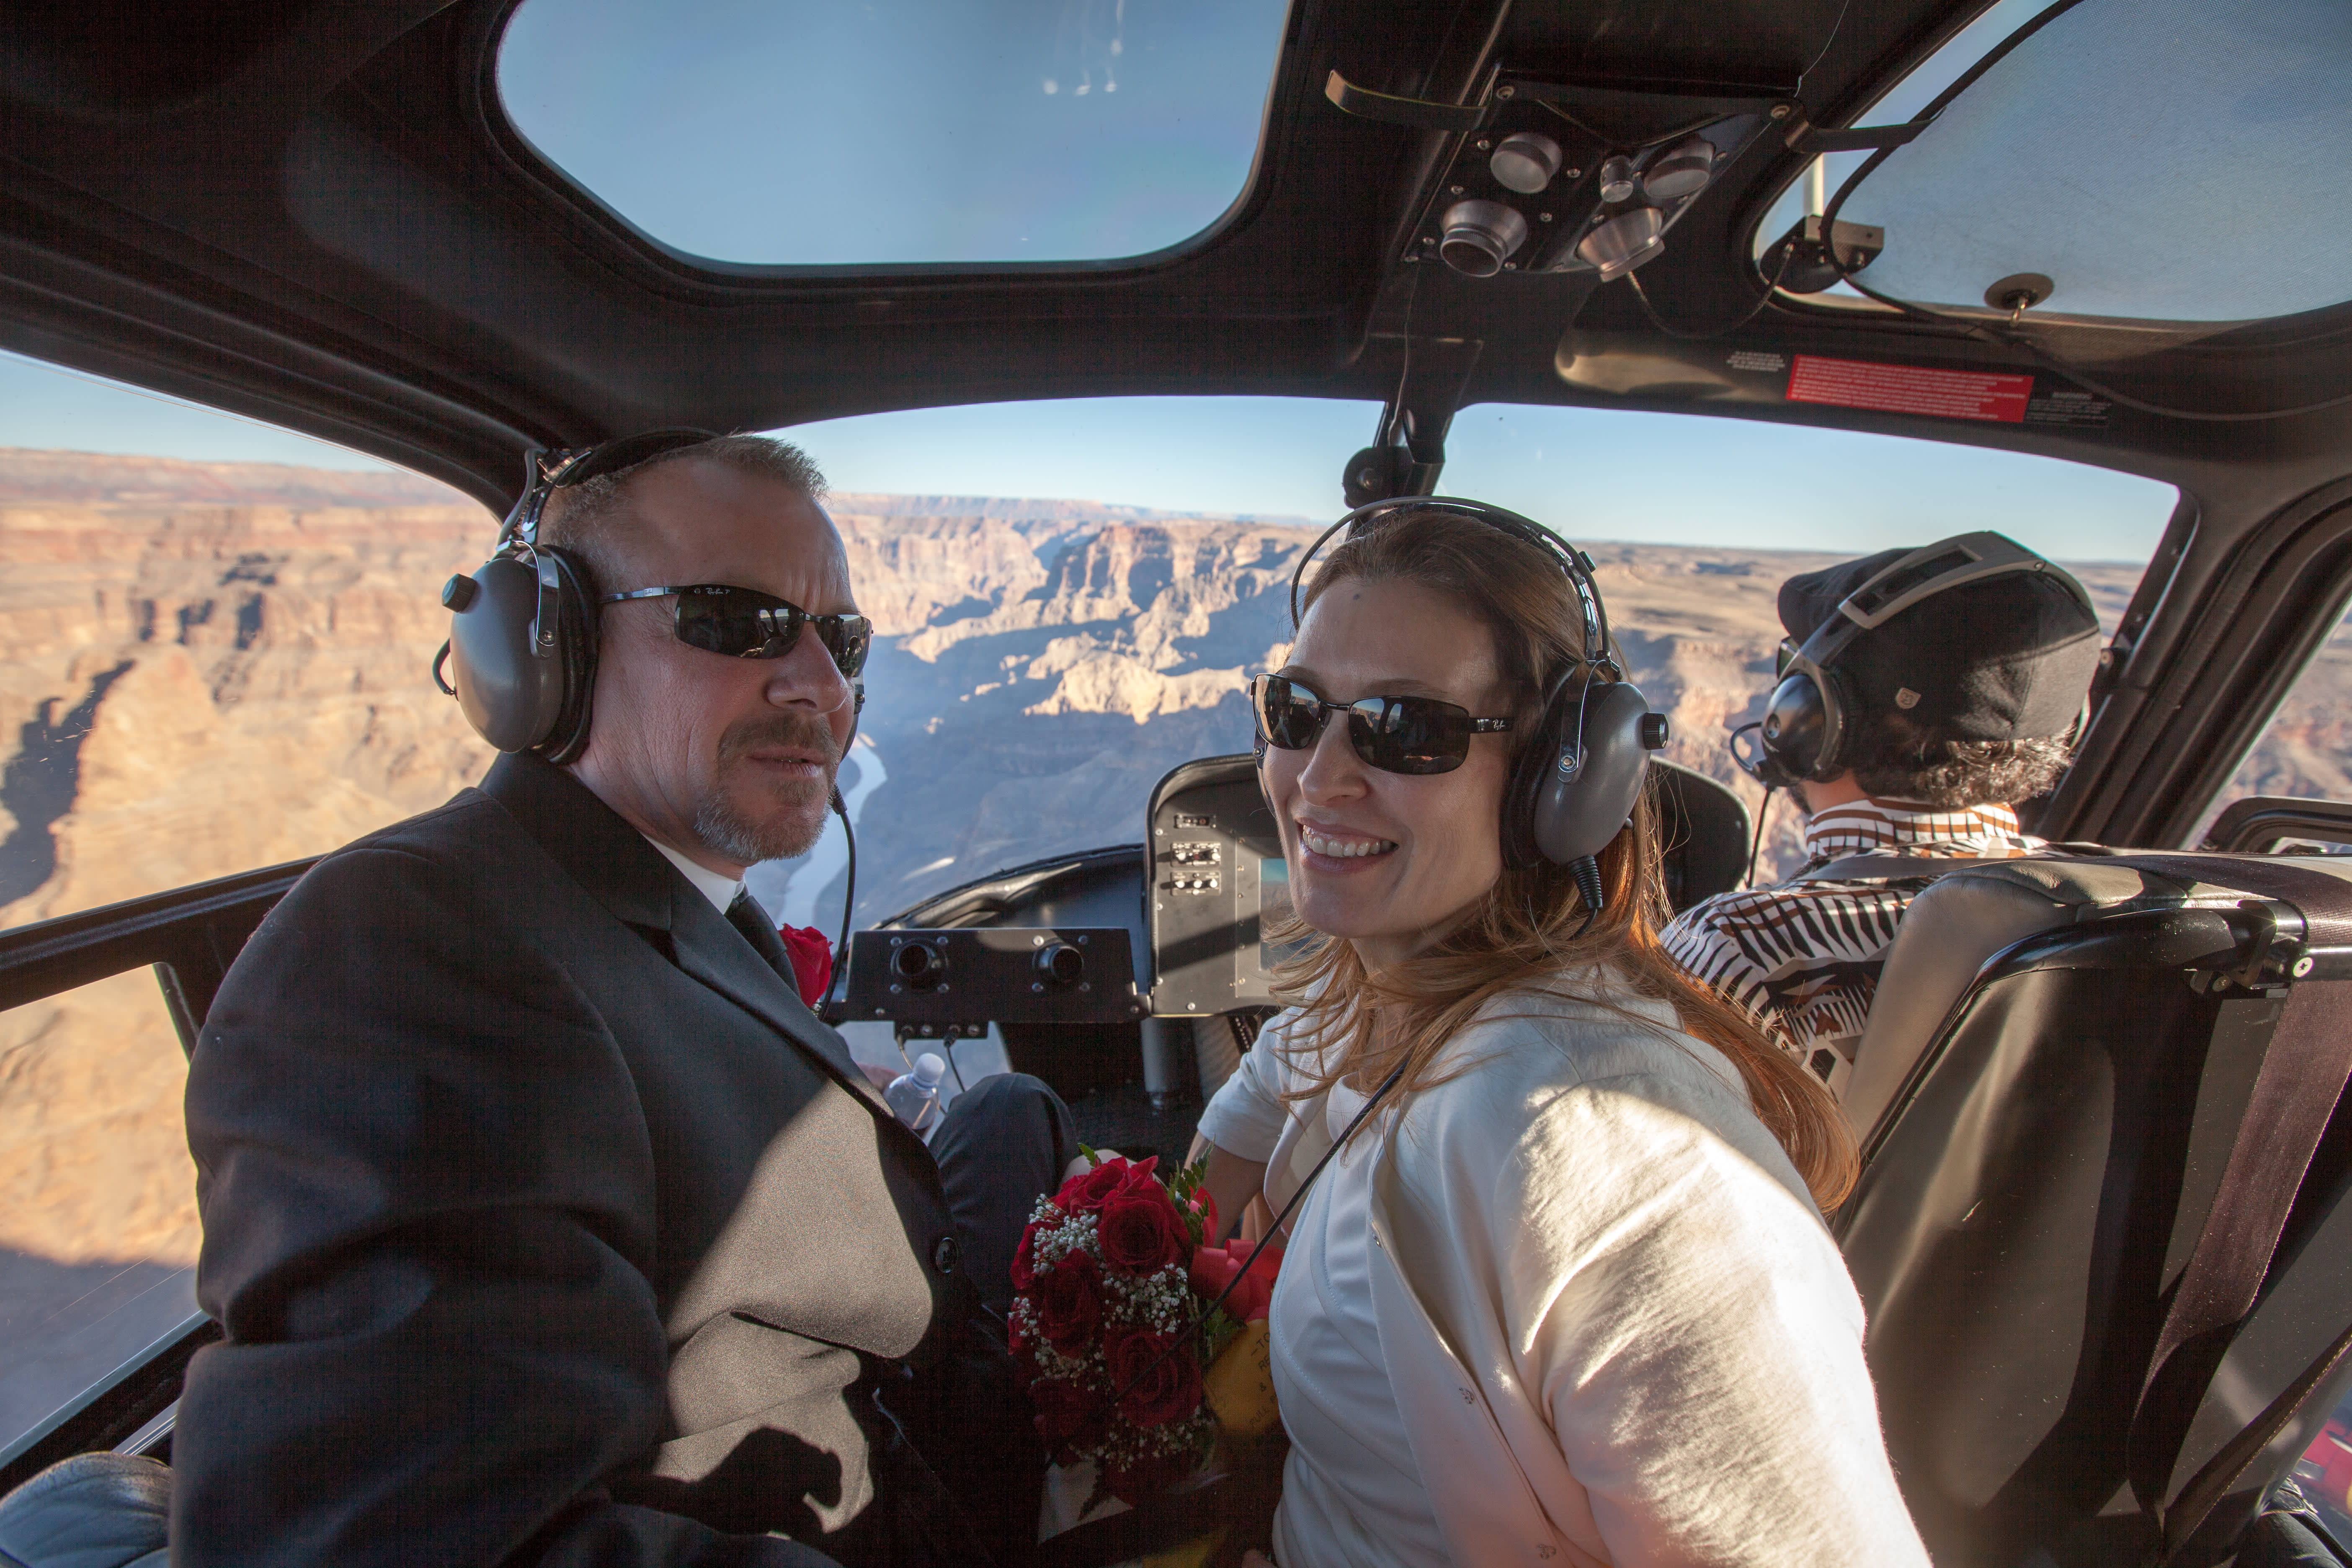 Grand Canyon helicopter wedding ceremony package including a Private Wedding Coordinator, luxury jet helicopter, private SUV and wedding cake